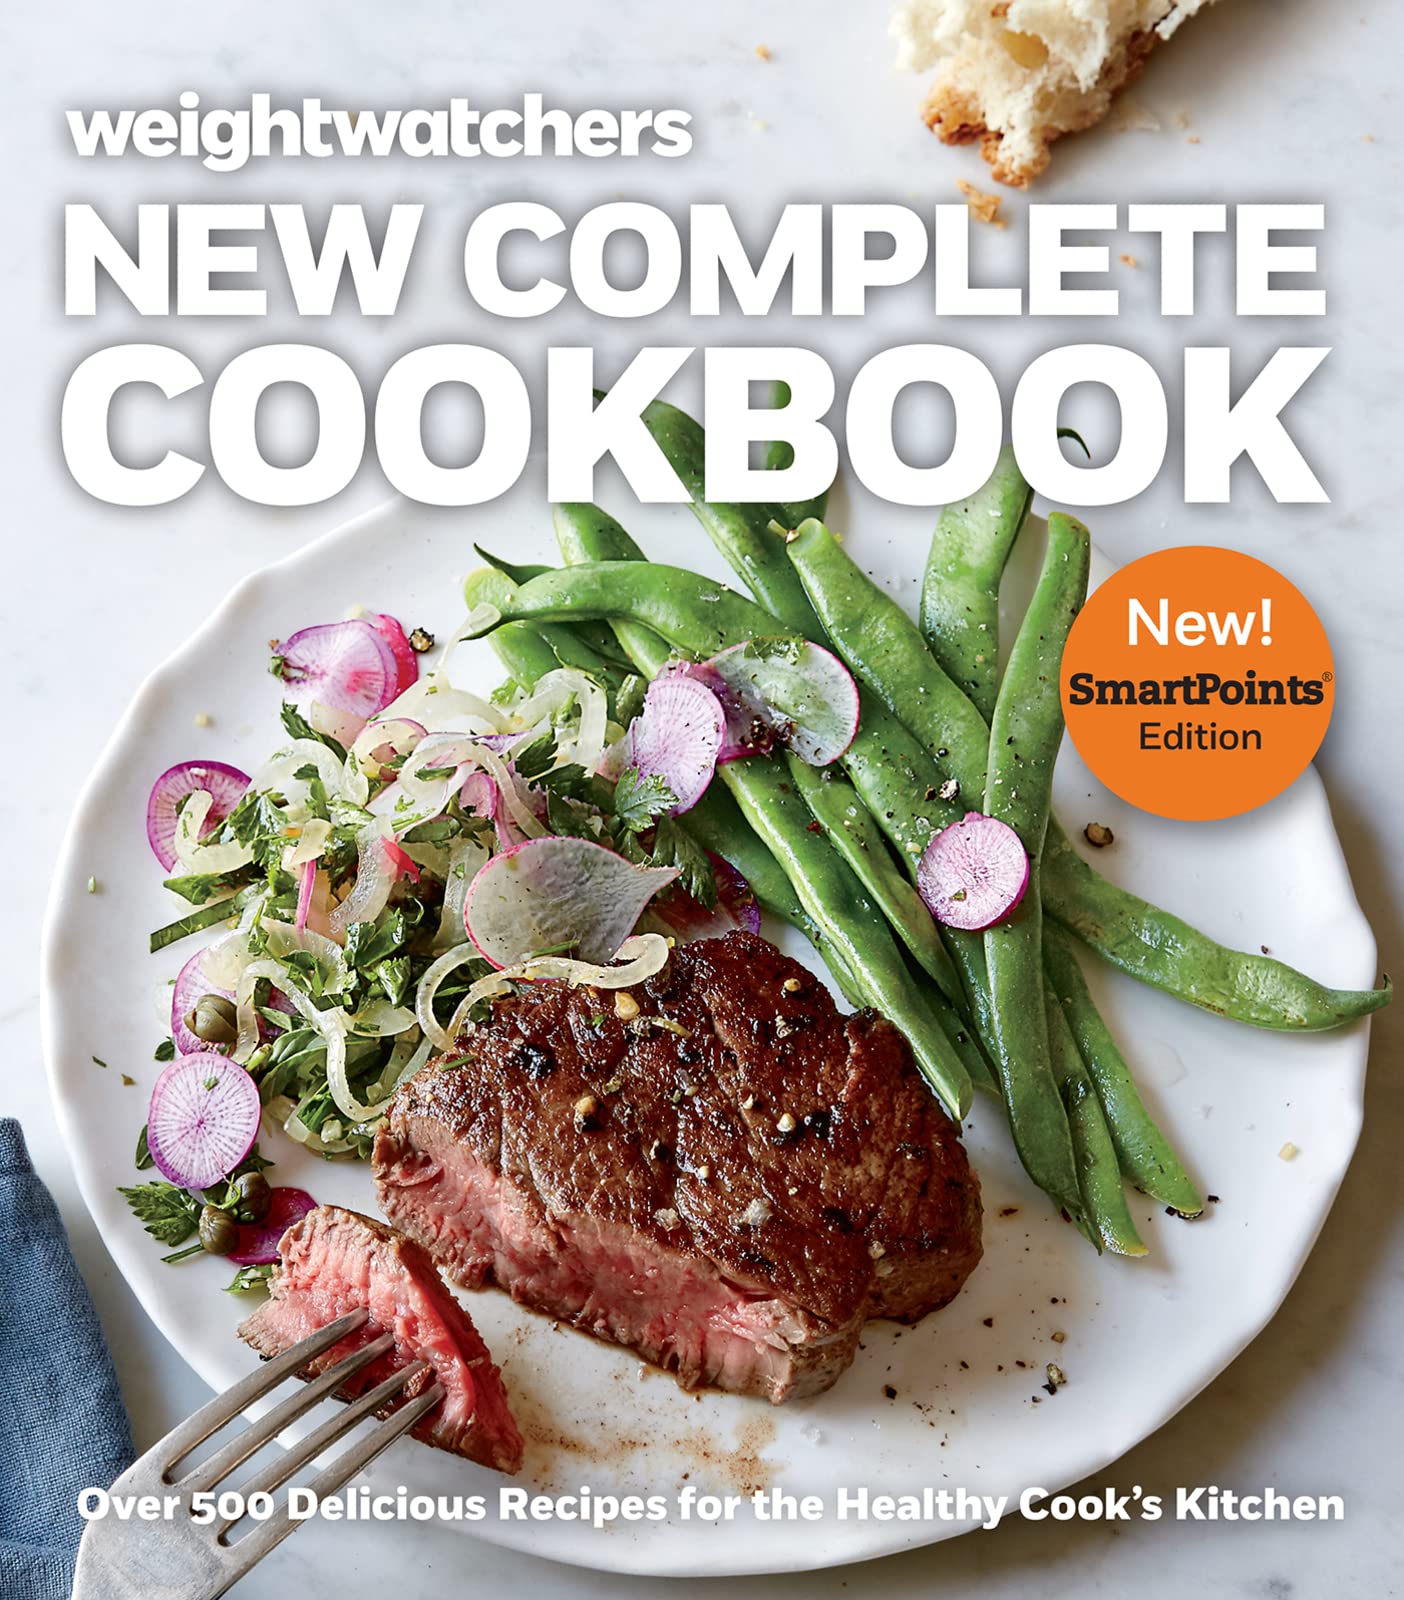 Weight Watchers New Complete Cookbook: Over 500 Delicious Recipes for the Healthy Cook's Kitchen by Weight Watchers